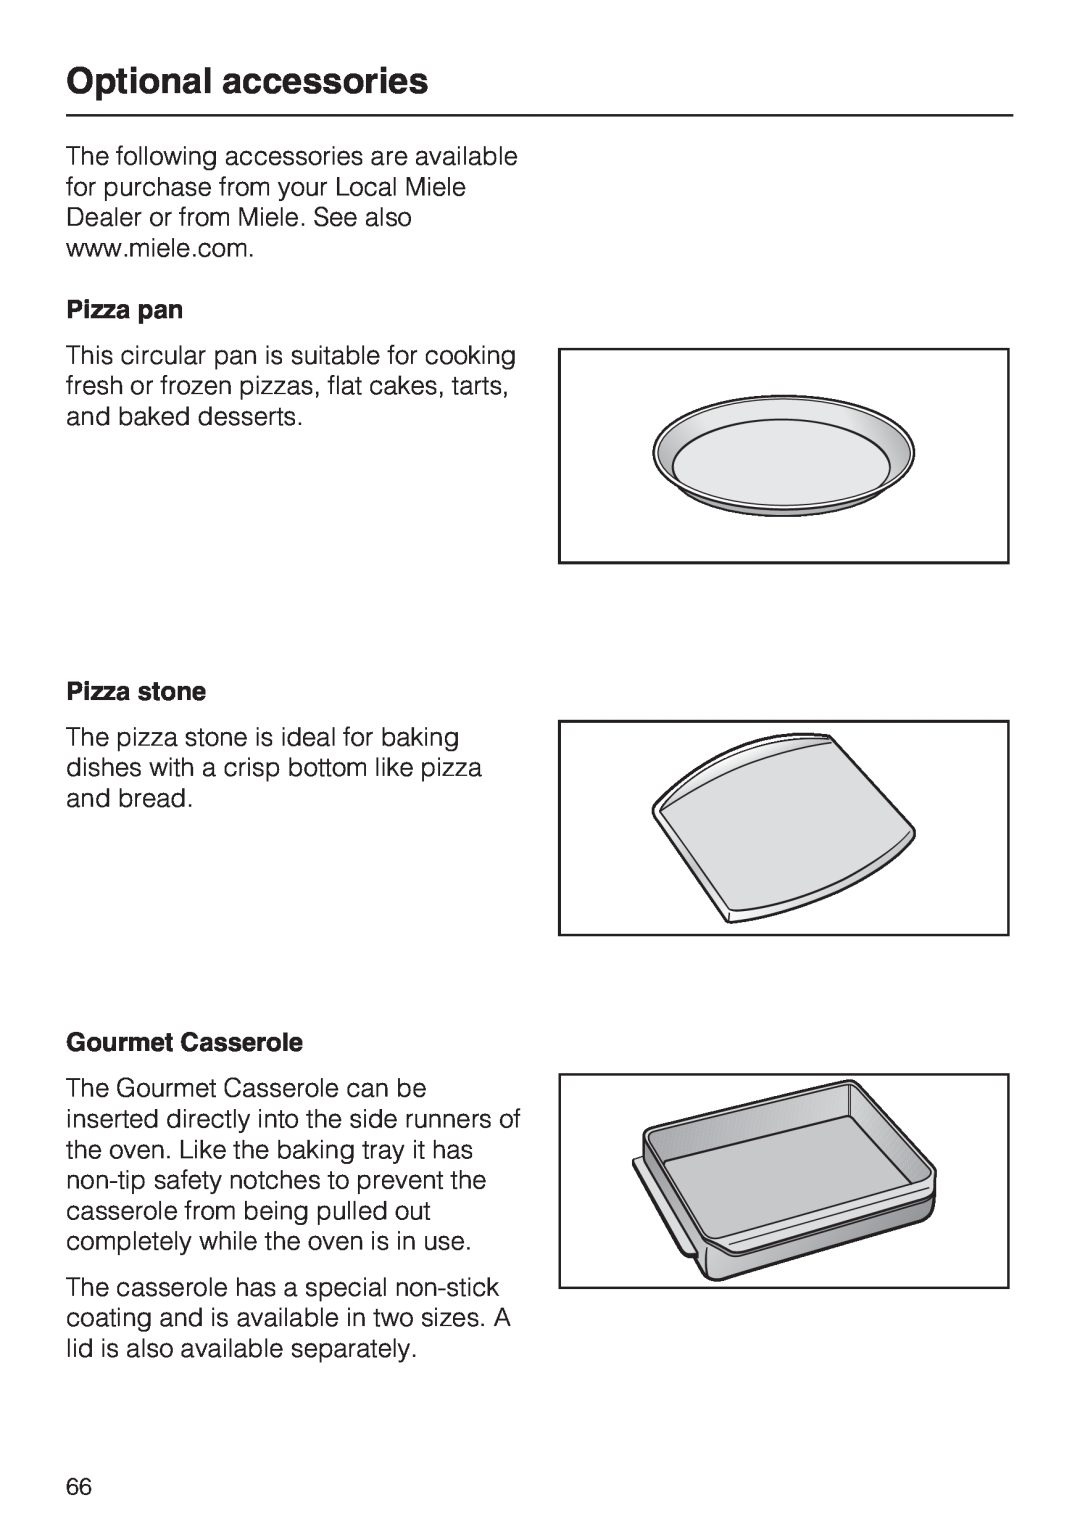 Miele H4680B installation instructions Optional accessories, Pizza pan, Pizza stone, Gourmet Casserole 